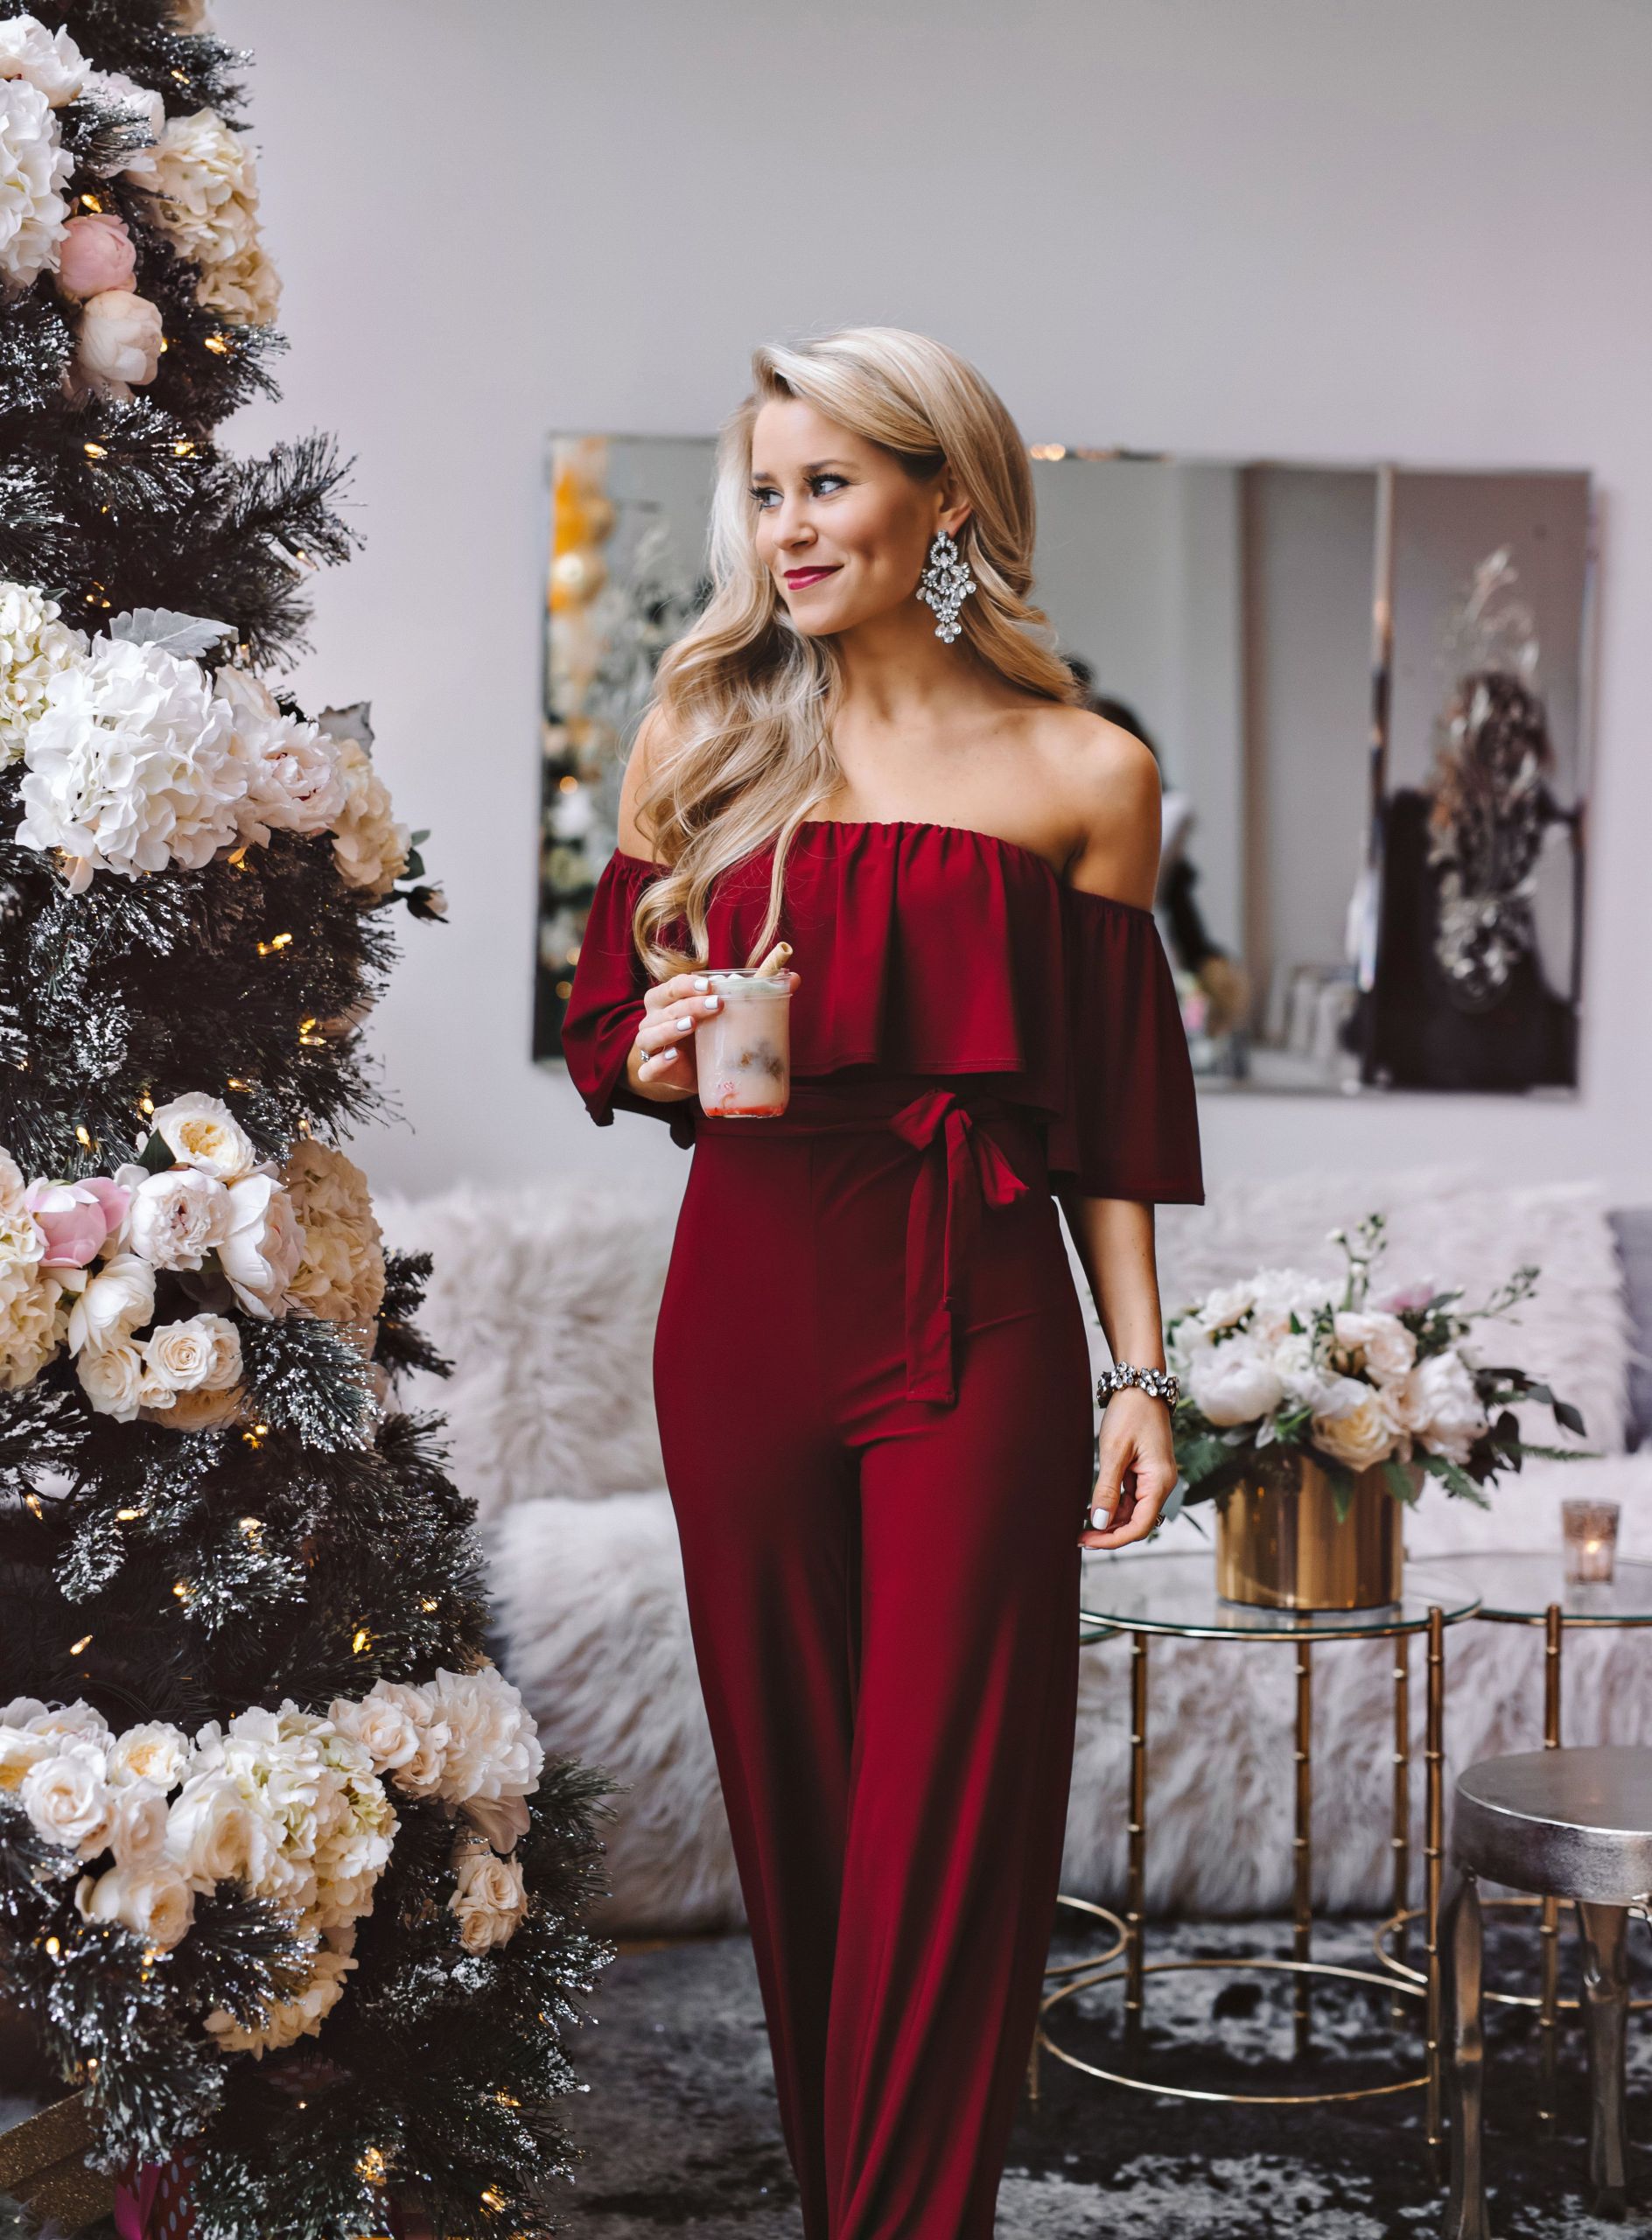 Christmas Party Dressing Ideas
 Holiday Party Decor Outfit Ideas